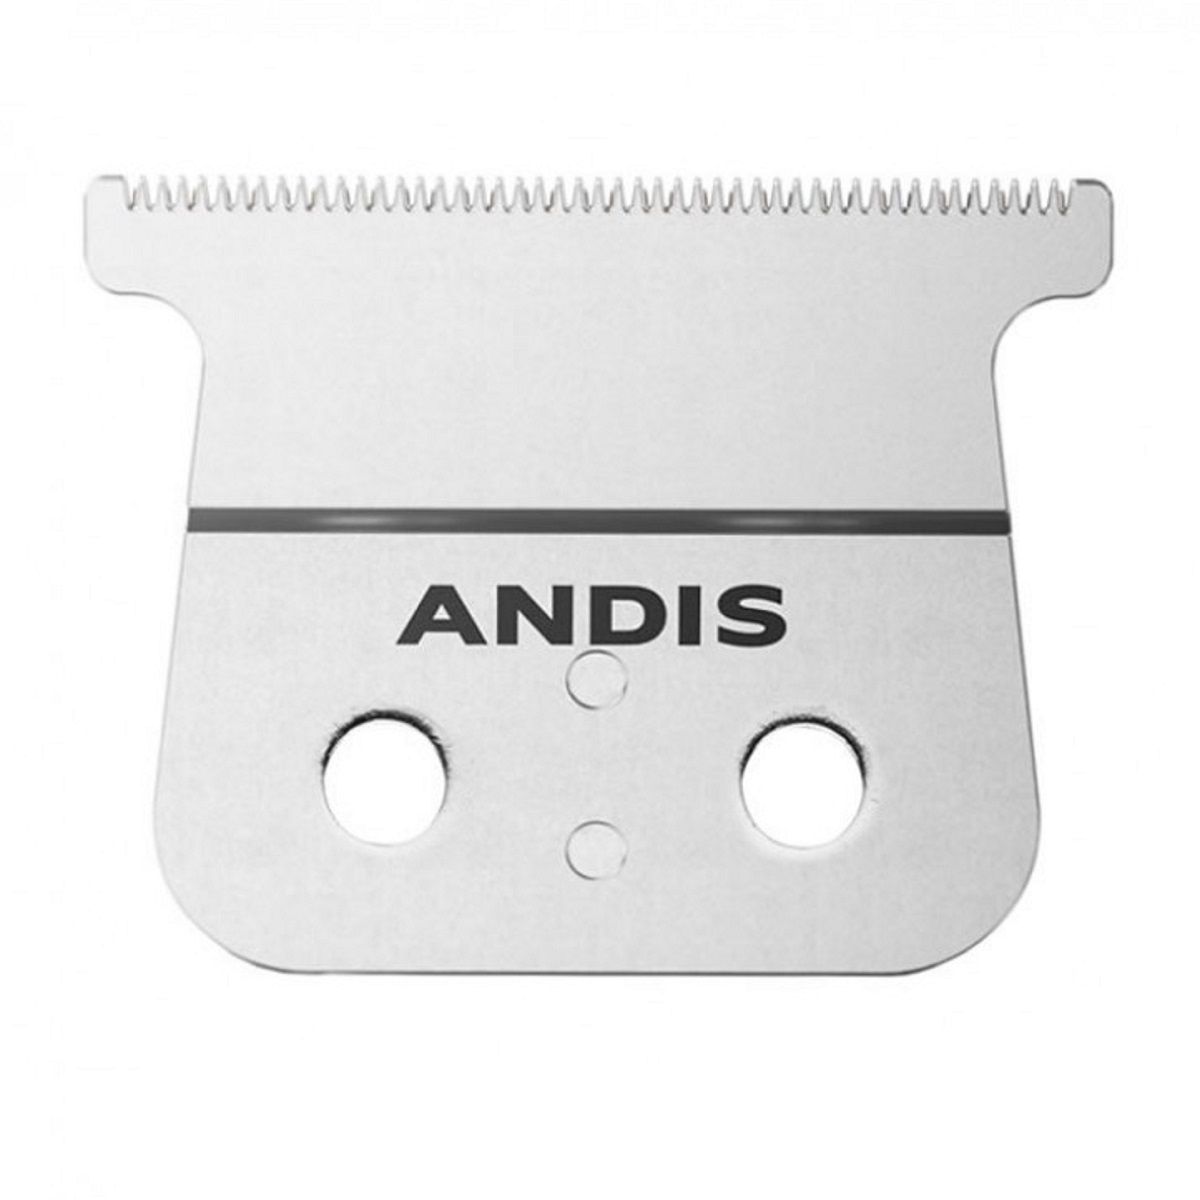 Andis beSPOKE Trimmer Replacement GTX-Z Blade #560149